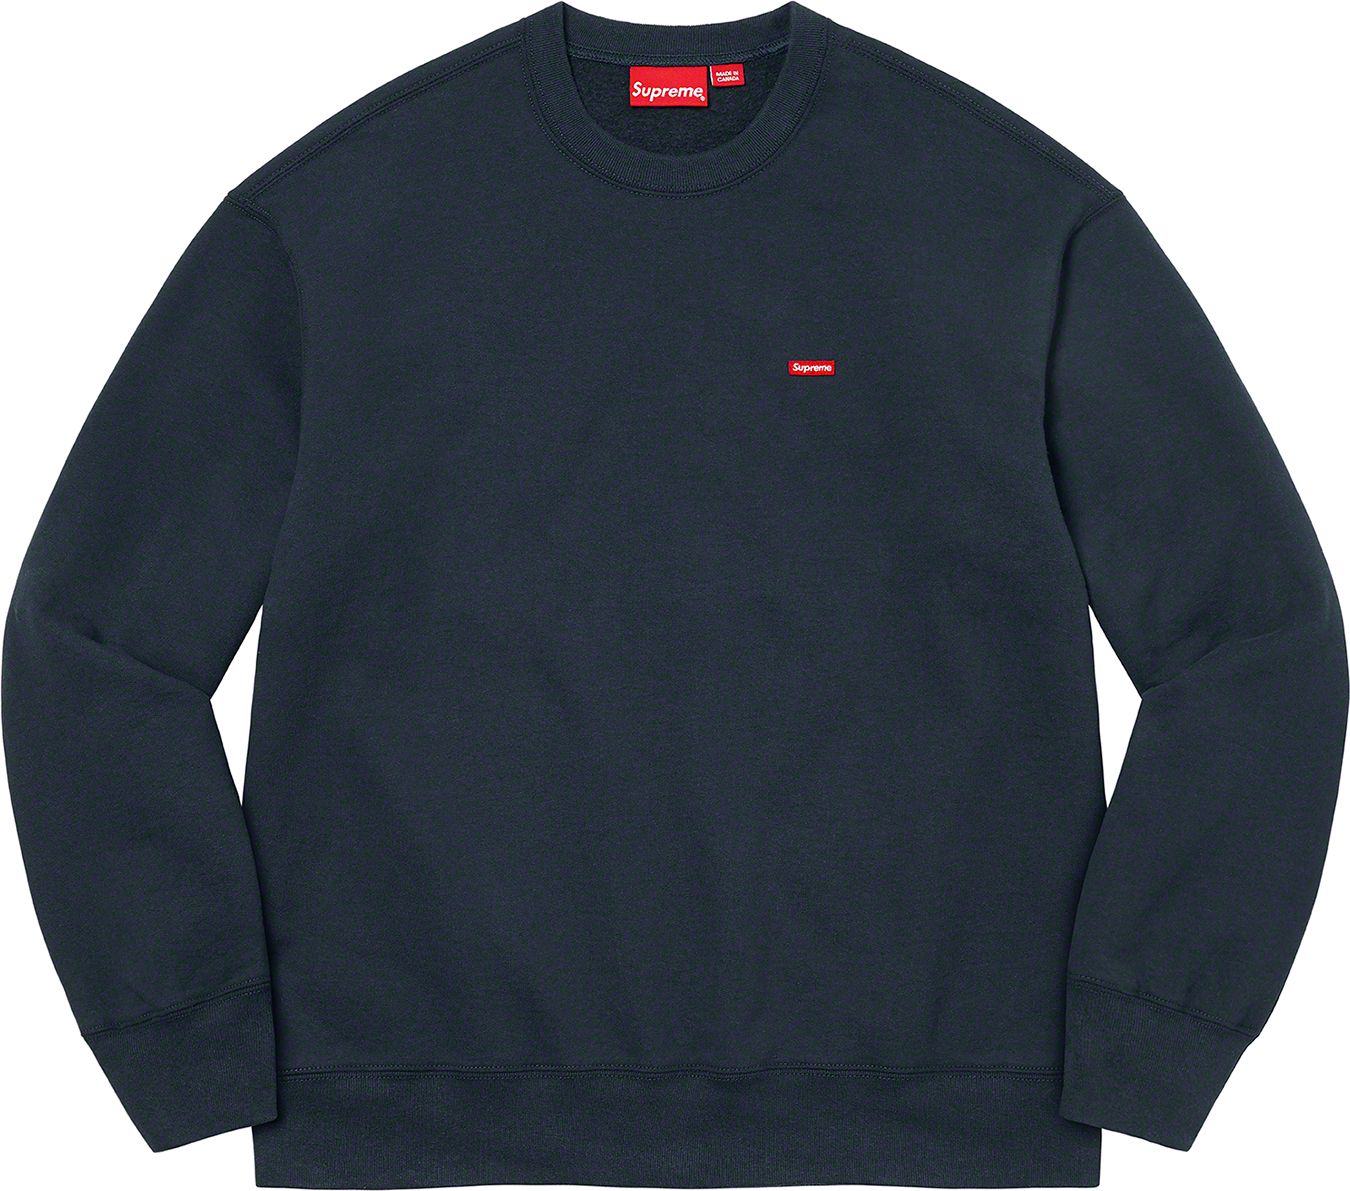 Supreme Box Logo Crewneck. Size M. Available in Store and on